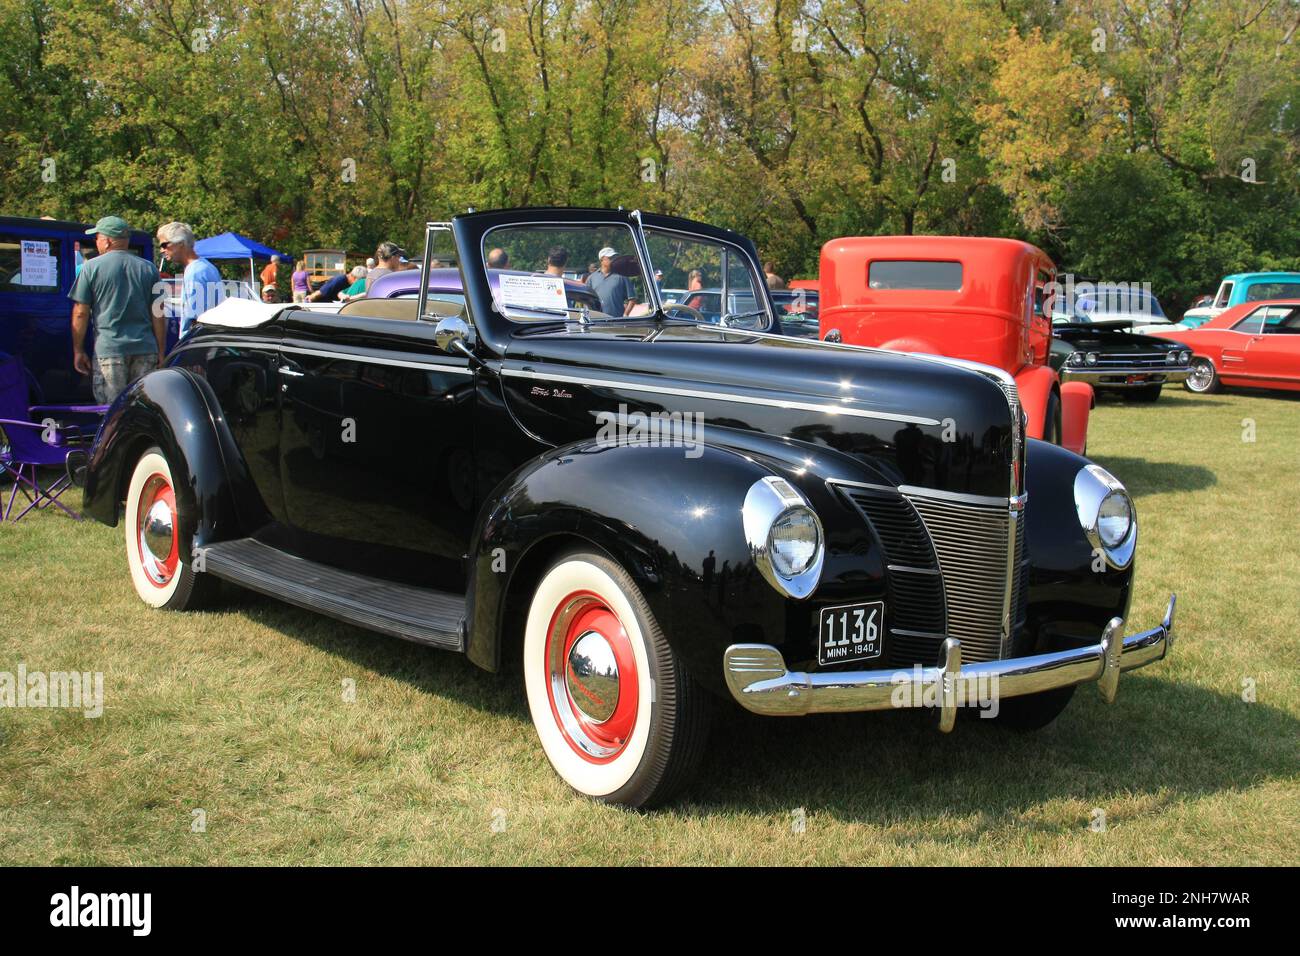 1940 Ford Deluxe Classic Car auf einer Wheels and Wings Car Show in Osceola, Wisconsin, USA. Stockfoto